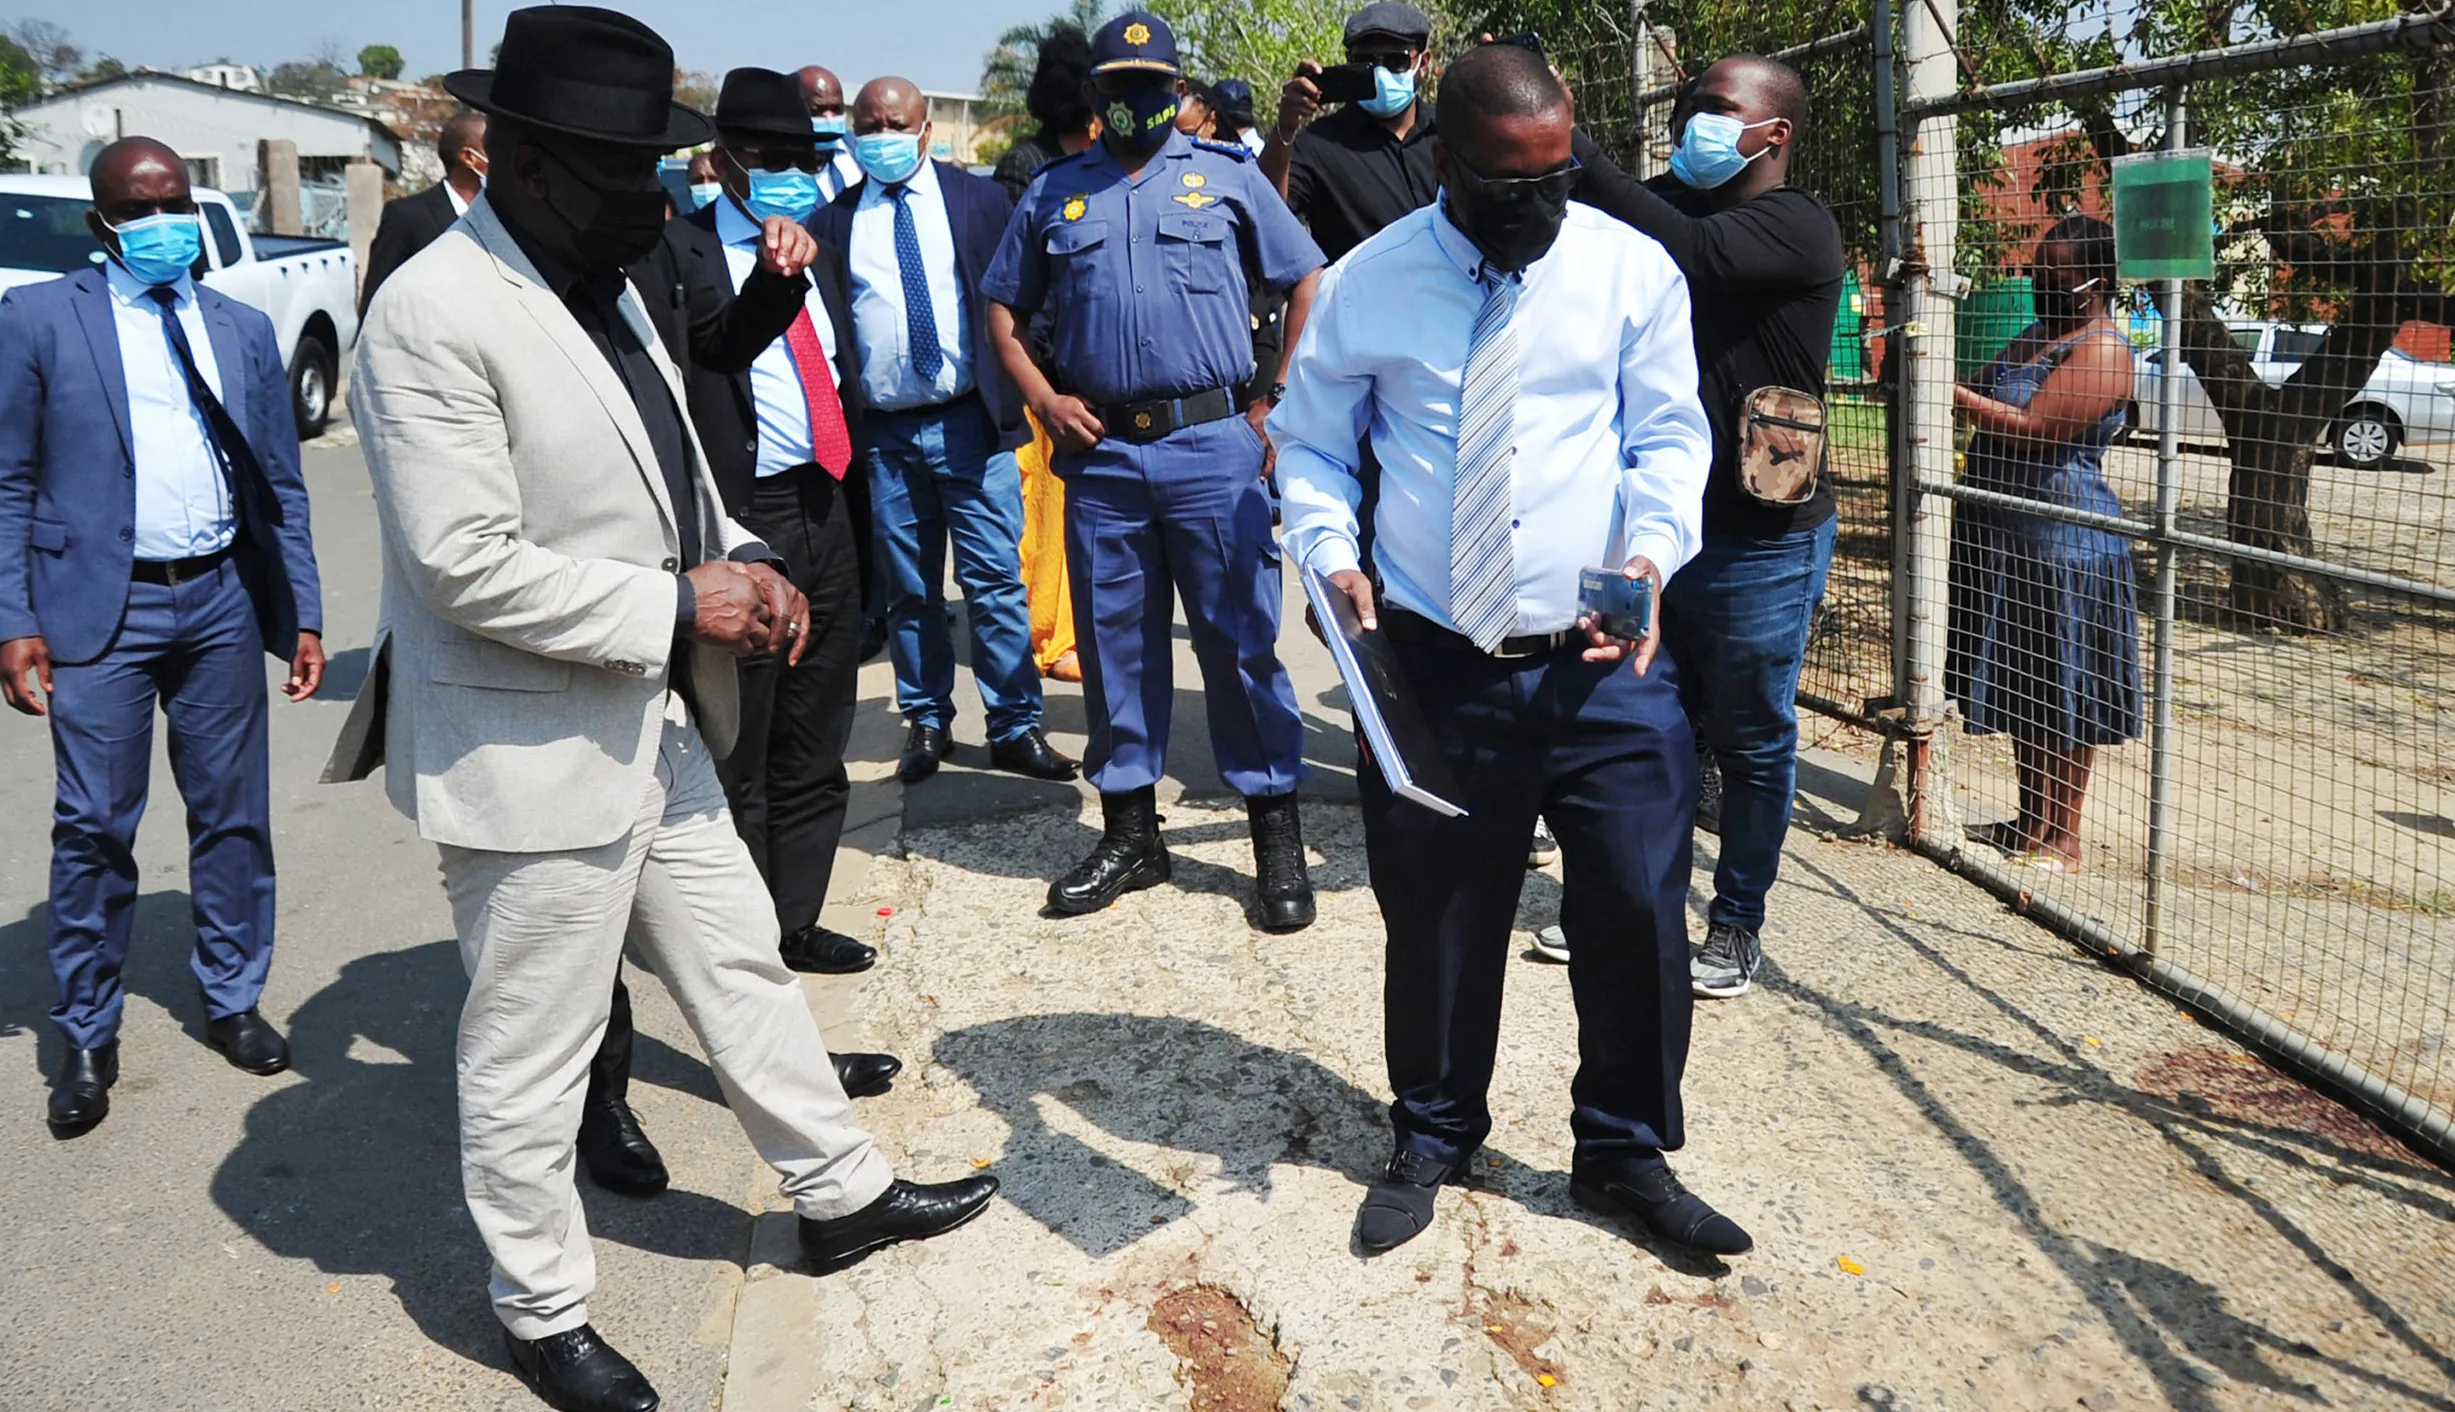 Minister of Police, General Bheki Cele visiting family homes and crime scenes